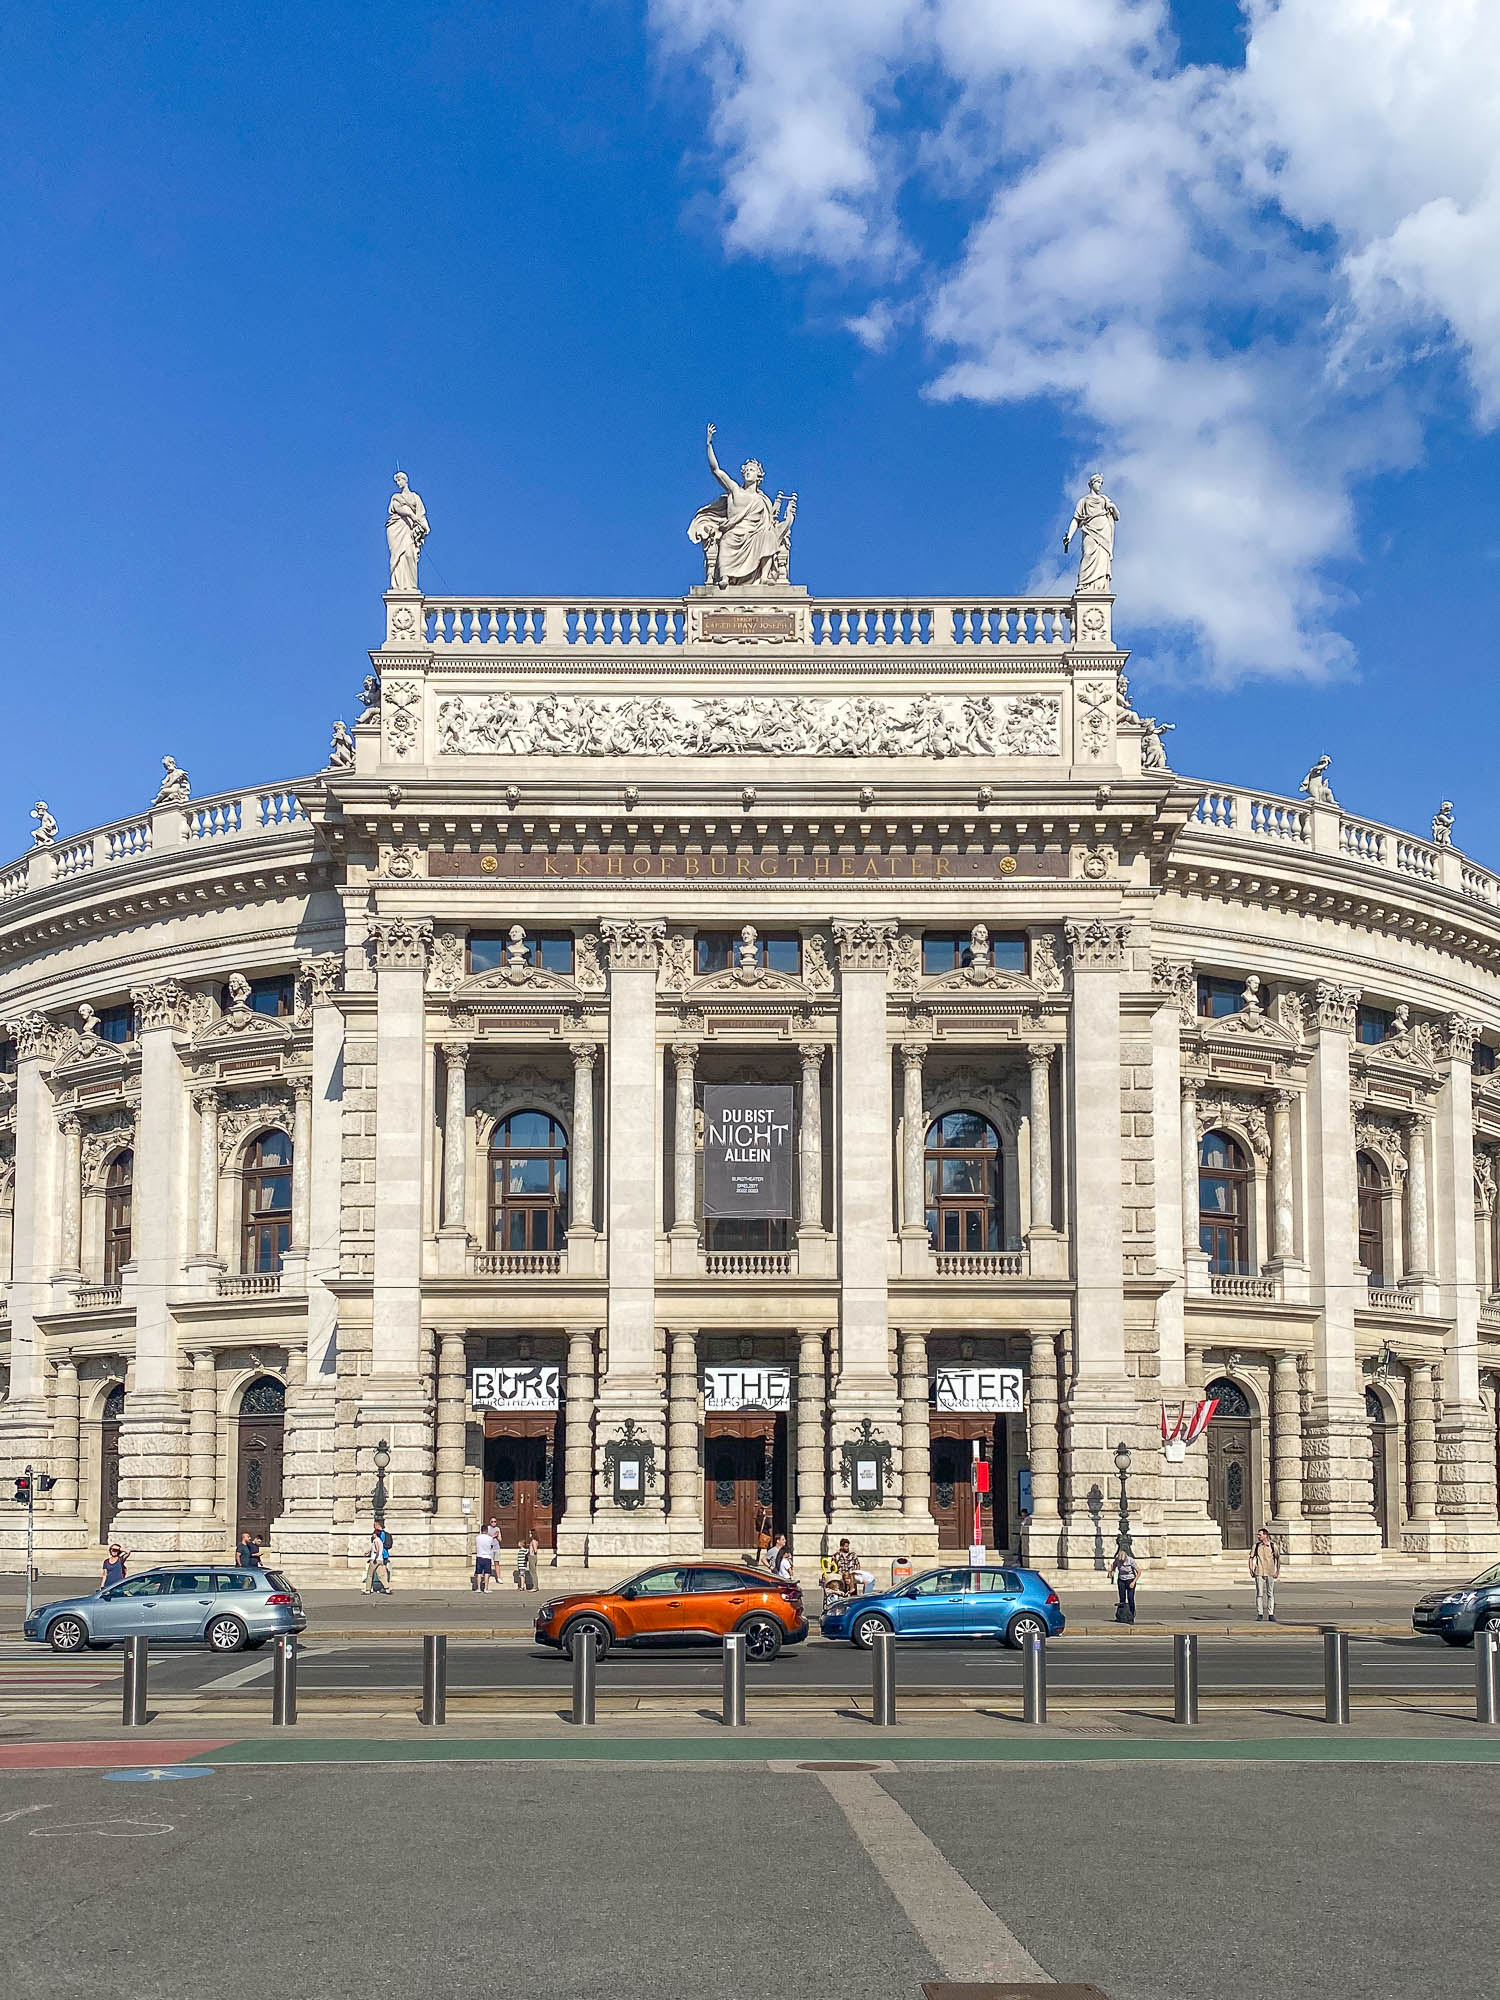 An ornate historical building with classical architecture under a blue sky with clouds. People and cars are visible in front, behind a metal barrier.